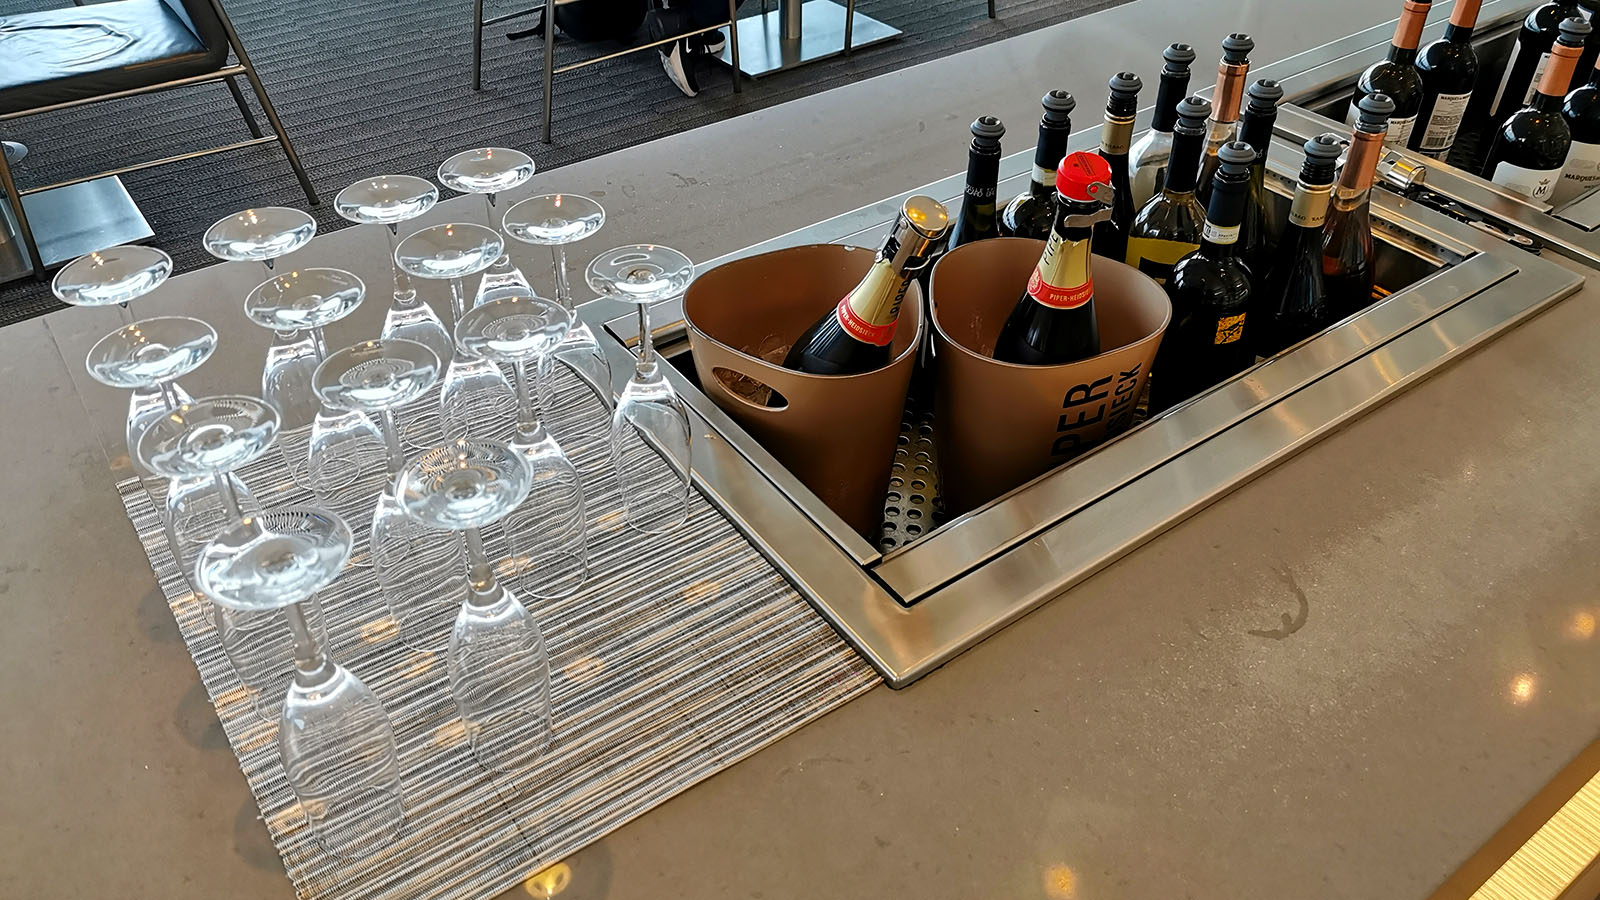 Glasses and wine in the American Airlines Flagship Lounge, Los Angeles